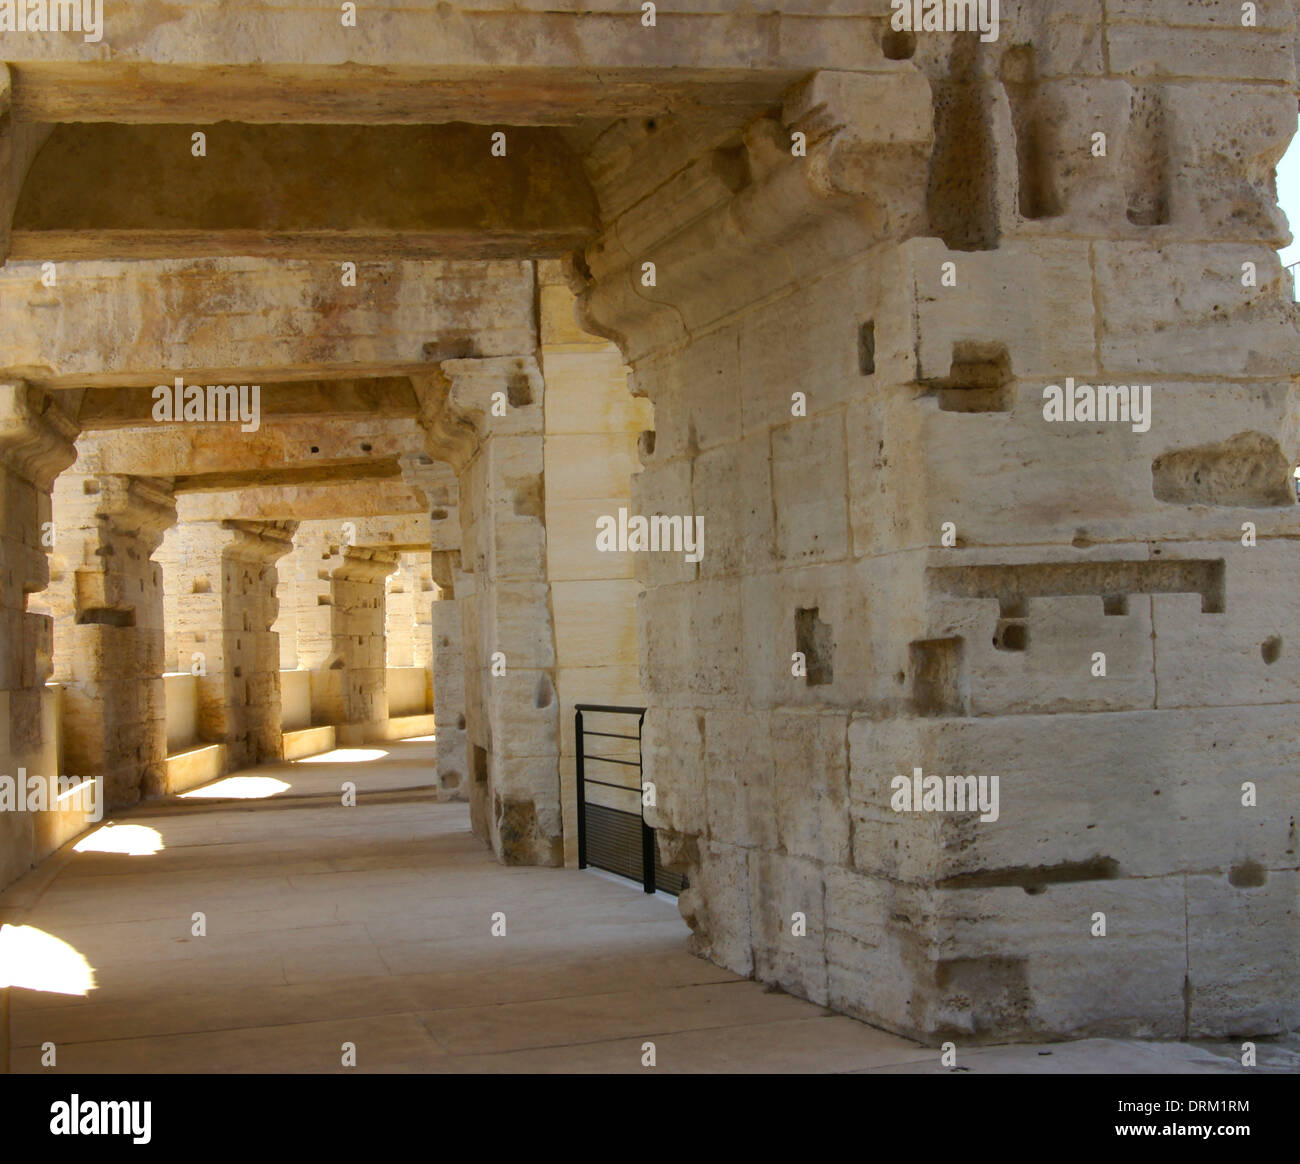 Where the sun has shined for 702,211 days - Stone construction details at Arles Amphitheater France Stock Photo